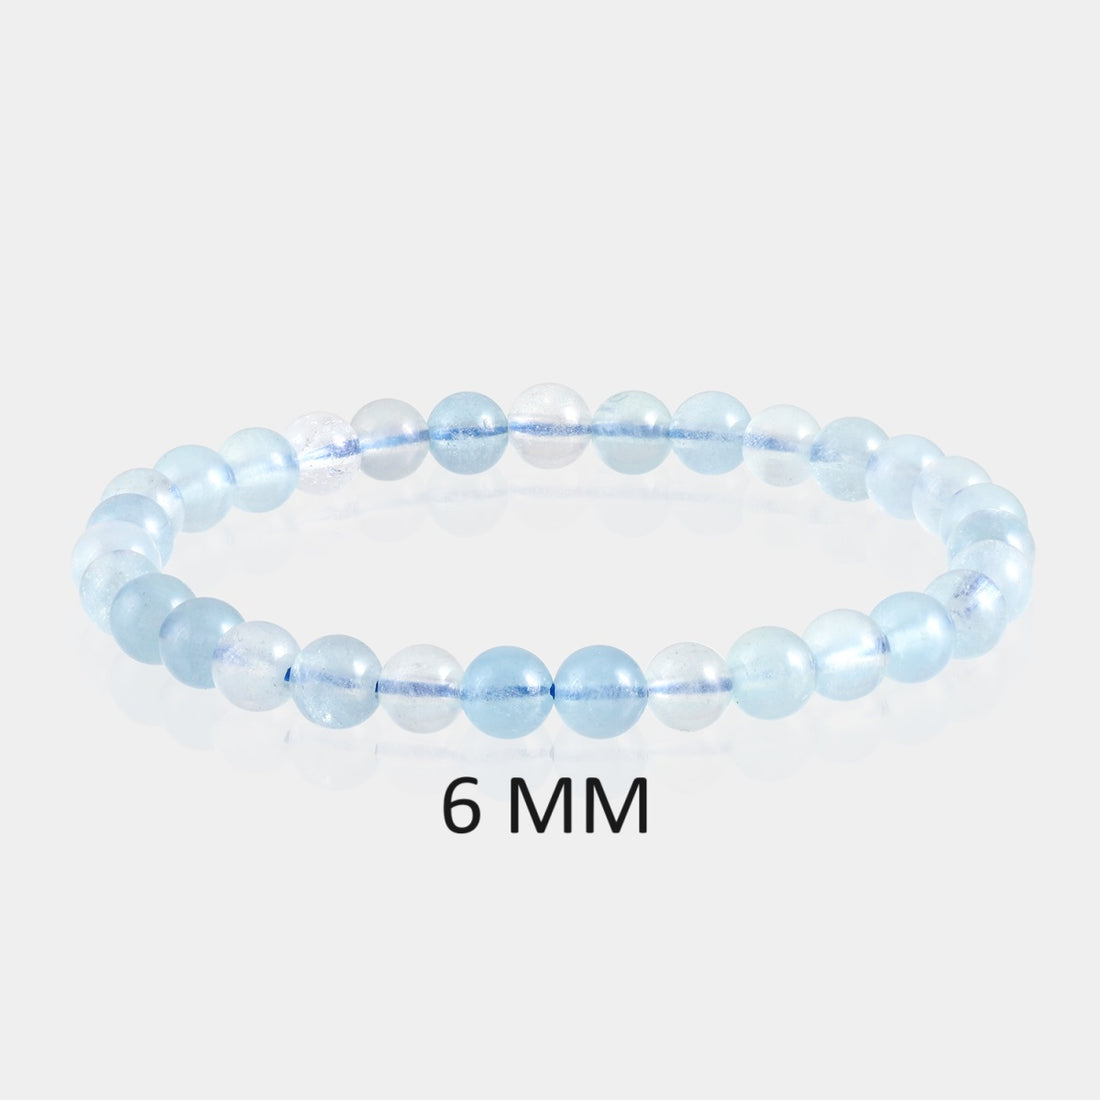 Artistic representation symbolizing the transformative energies of Aquamarine, the Stone of Inspiration, Courage, and Clarity.